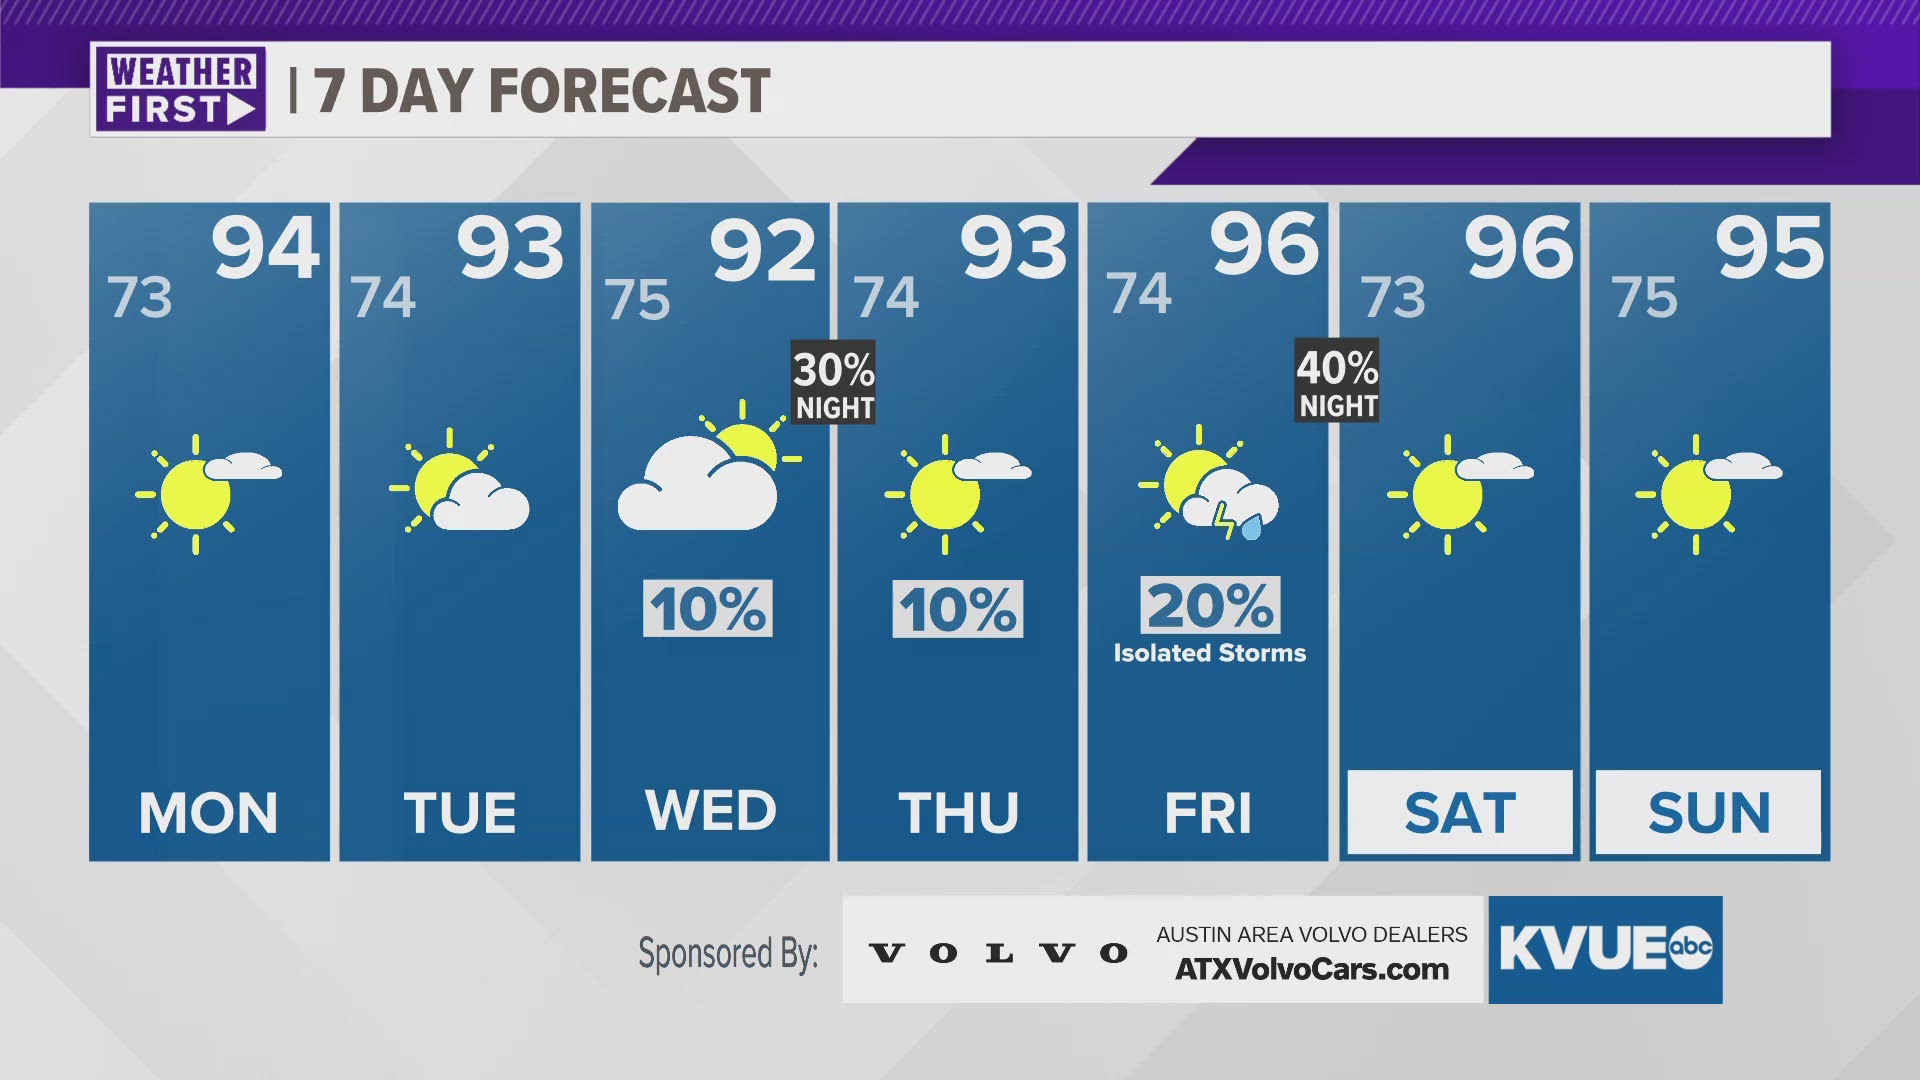 Hot, humid, but not a lot of storm chances